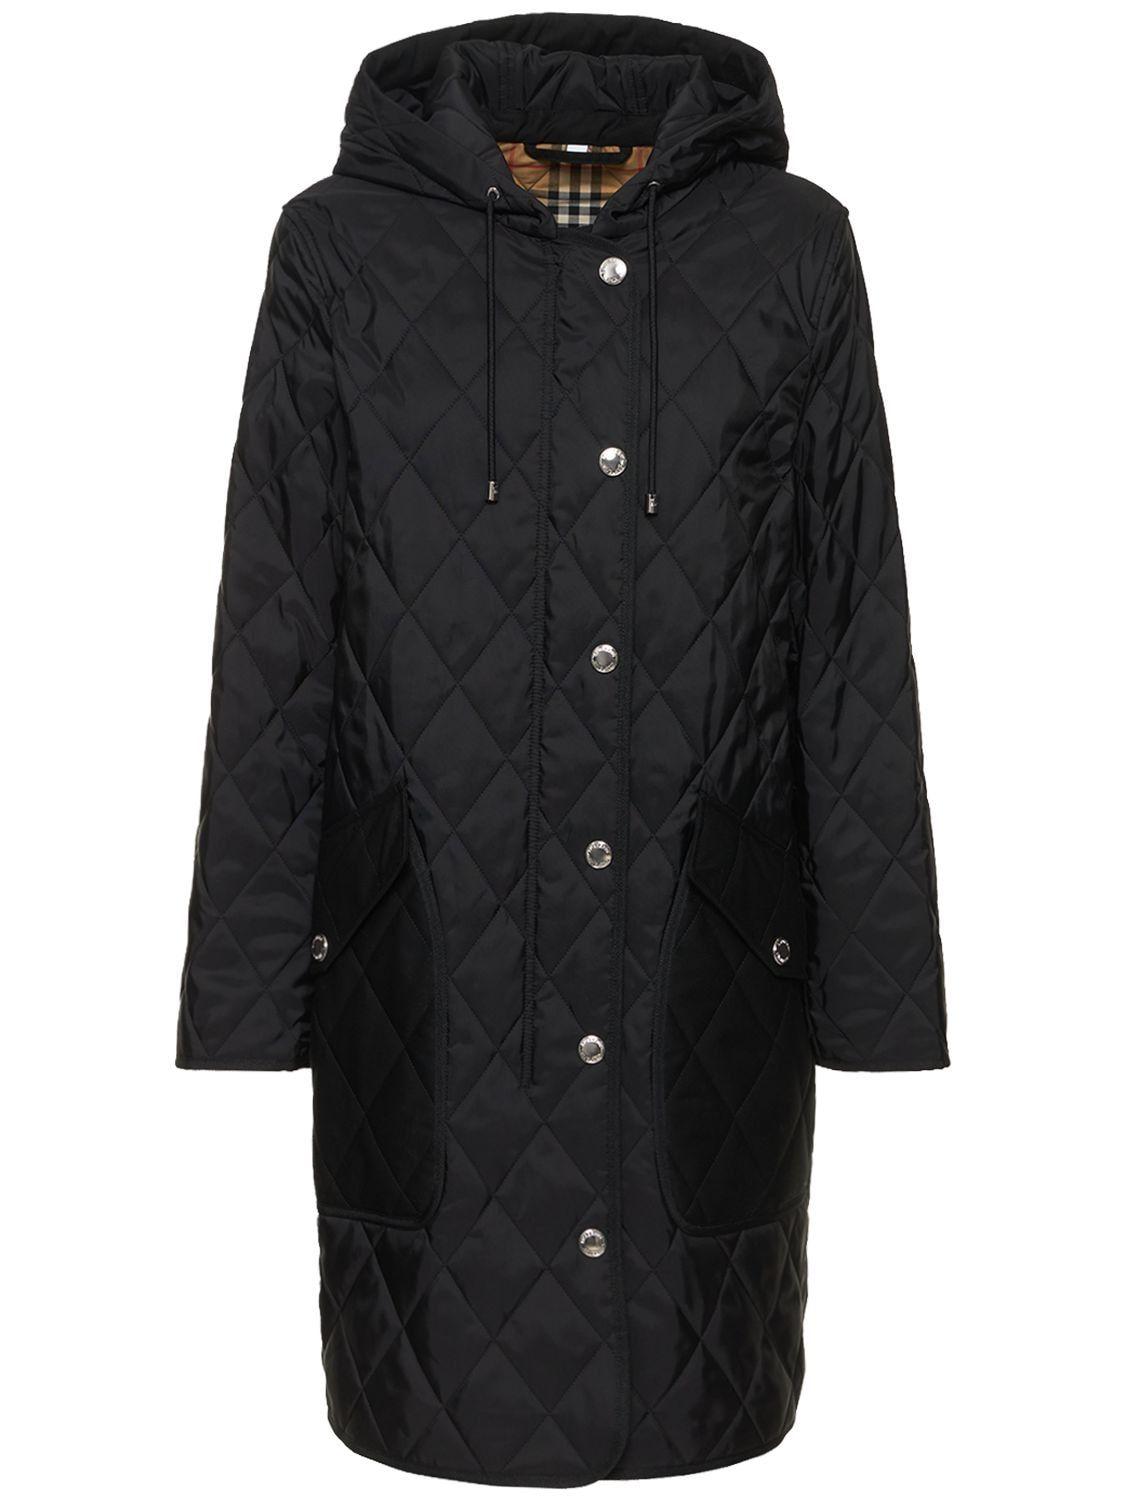 Burberry Roxby Quilted Nylon Coat in Black | Lyst